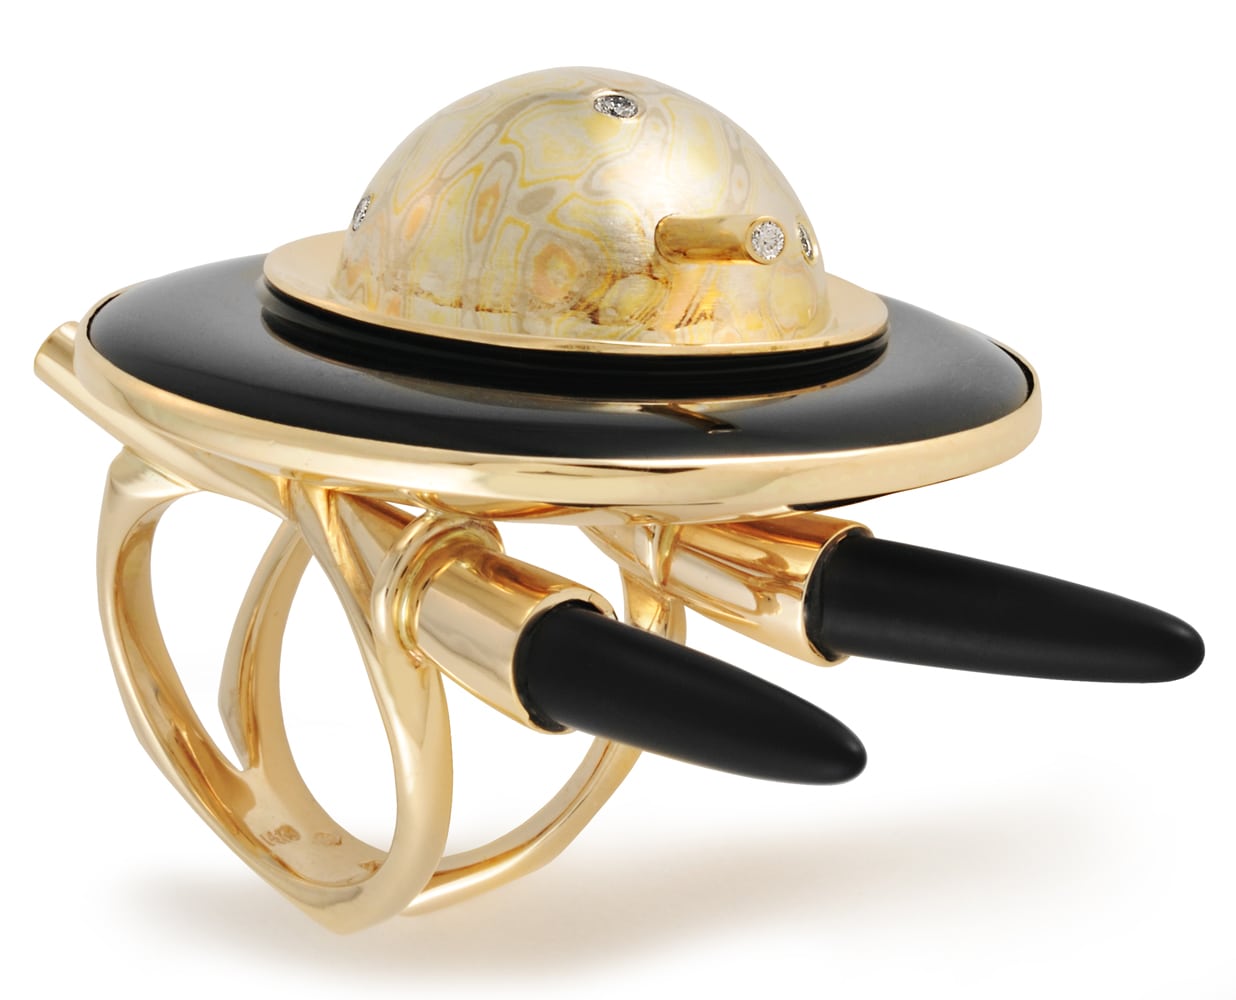 yellow gold ring with Starship Enterprise design with onyx disk and gold dome on top with small diamonds embedded